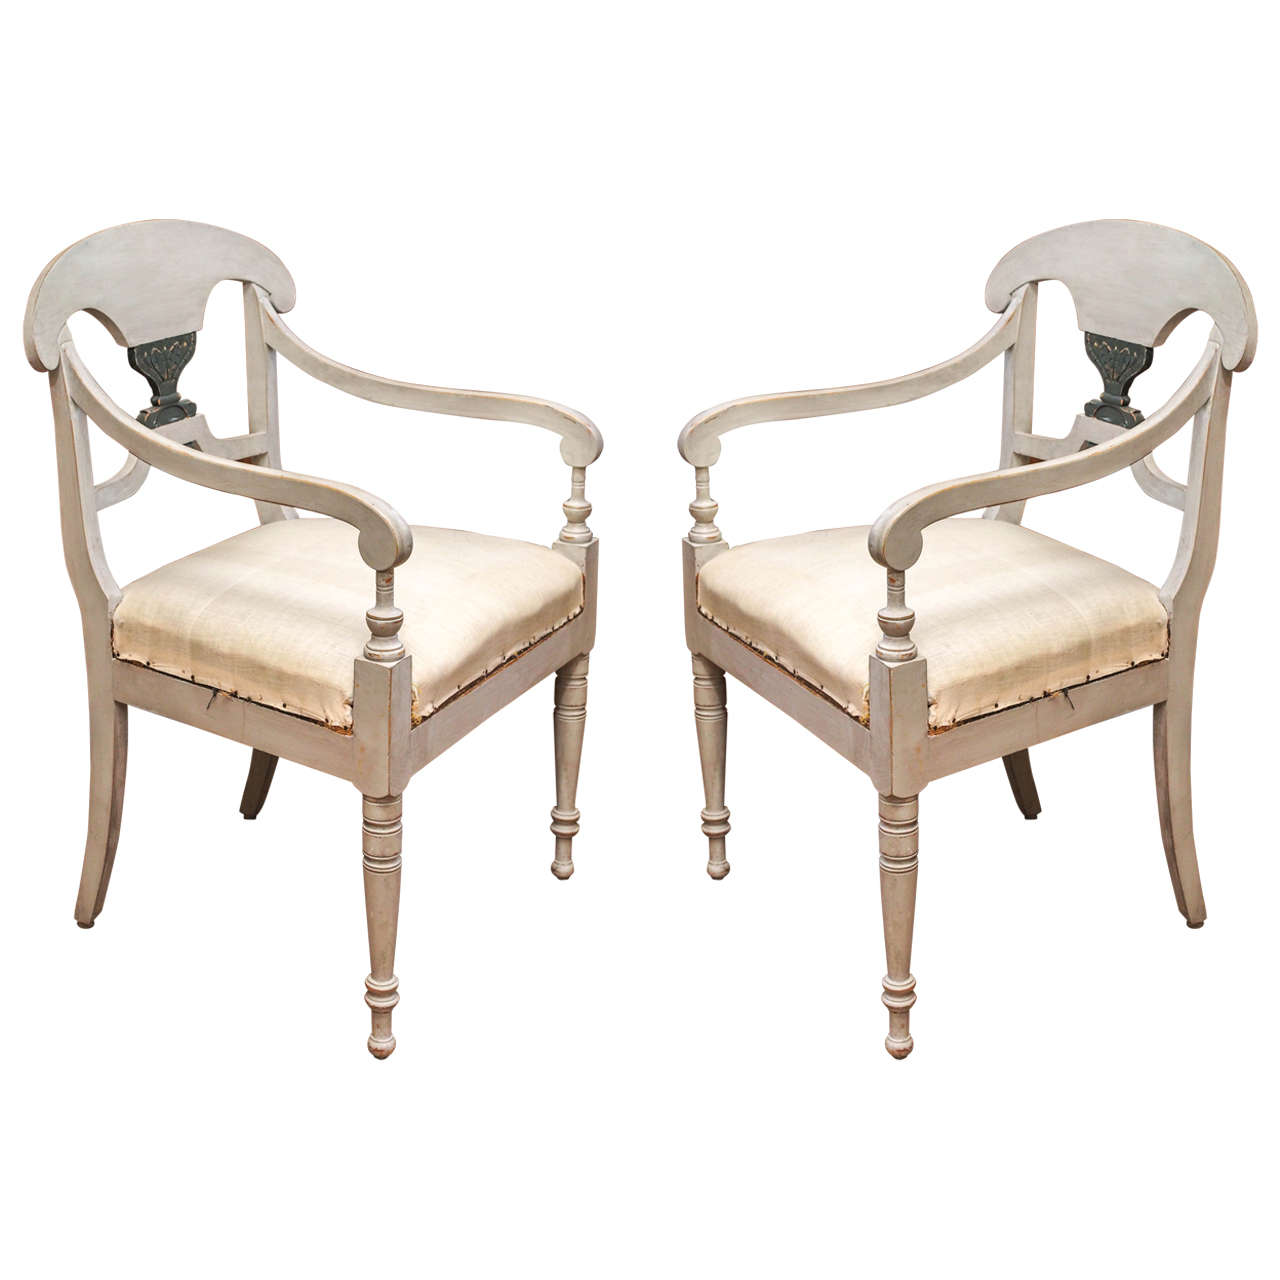 Pair of Early 19th Century Painted Swedish Armchairs